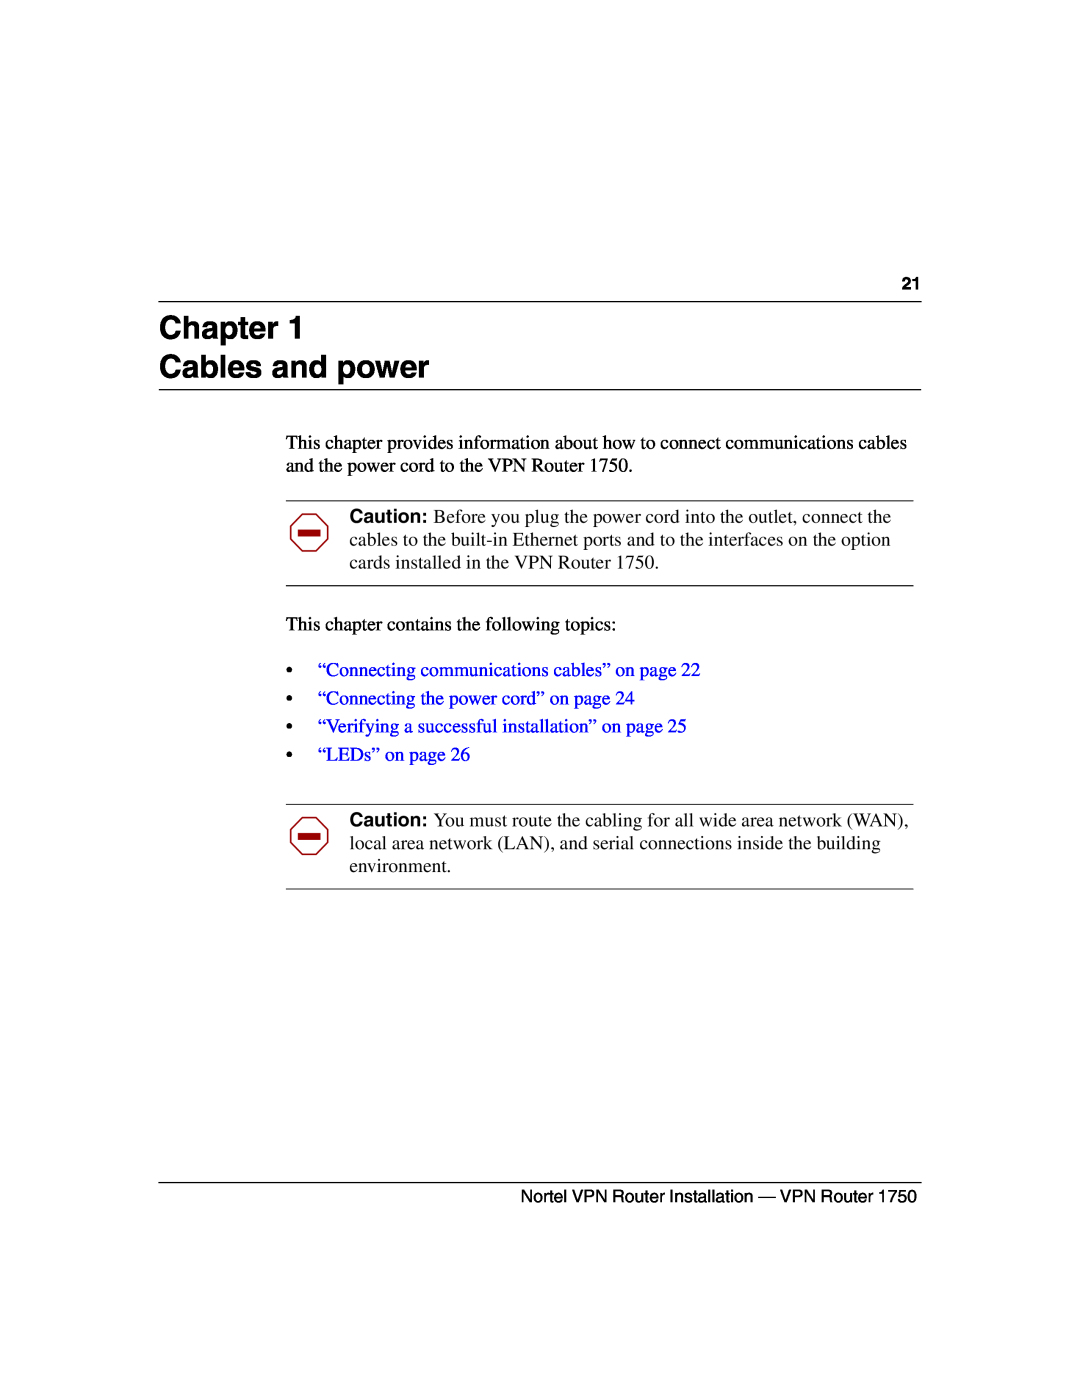 Nortel Networks 1750 manual Chapter Cables and power, “Connecting communications cables” on page 